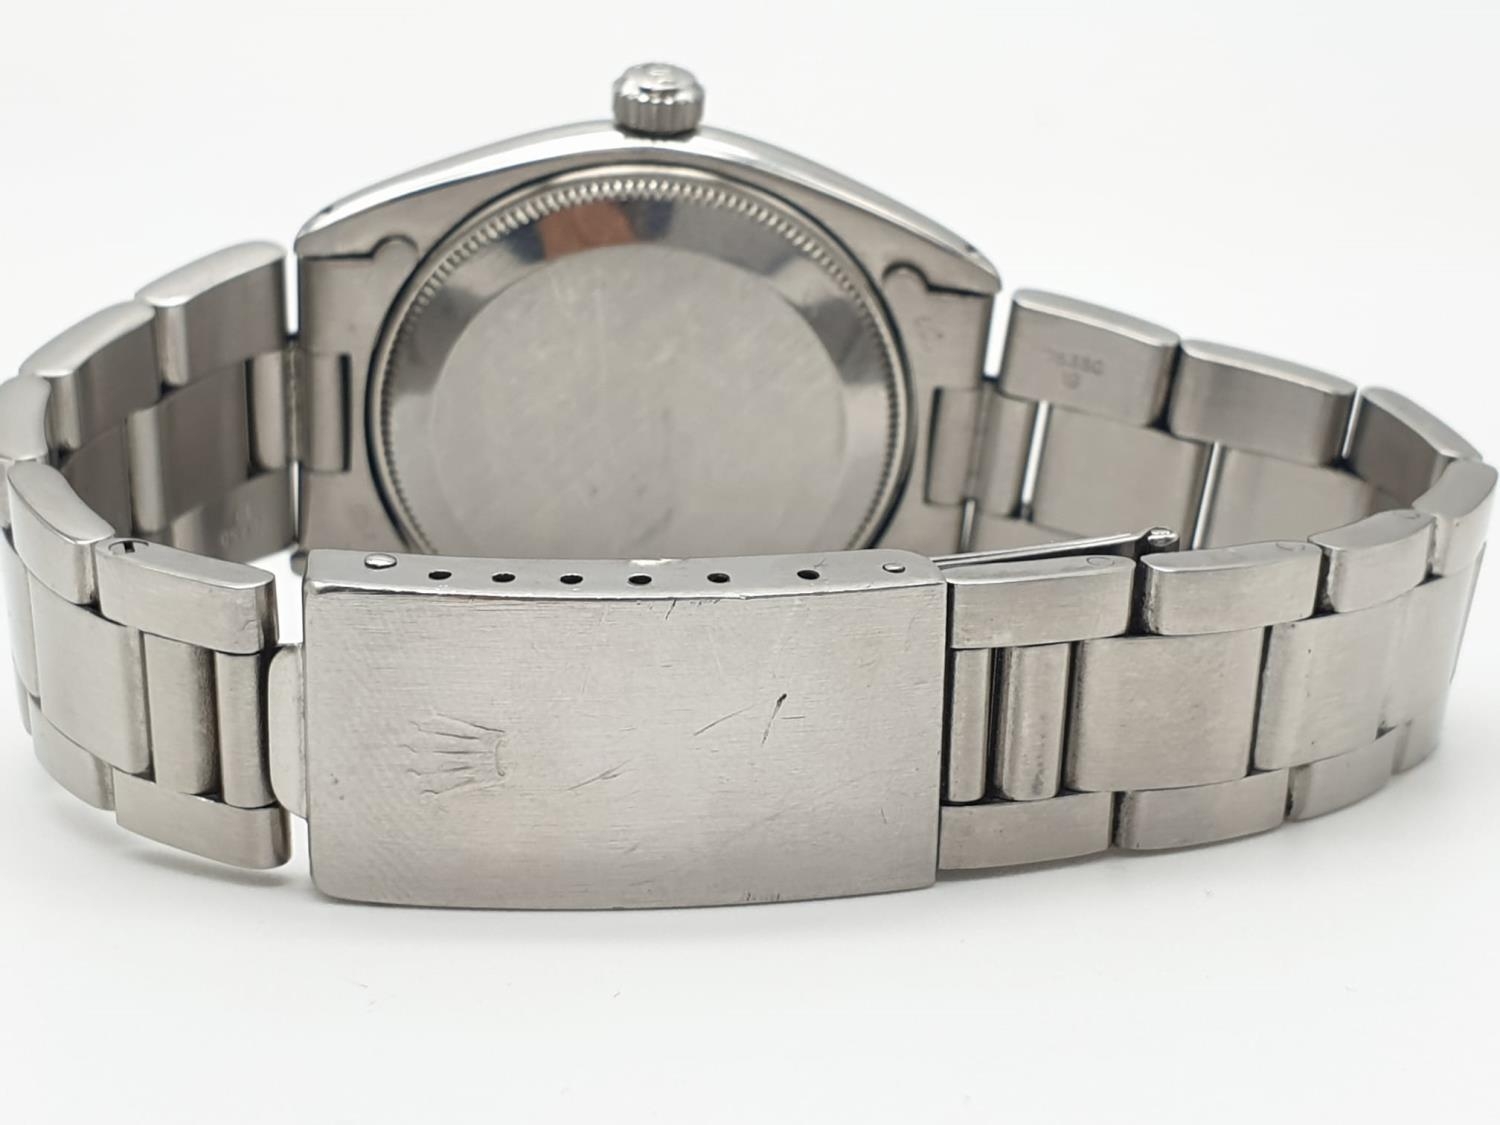 ROLEX OYSTER PERPETUAL WATCH IN STAINLESS STEEL, GOOD CODITION FWO 36MM - Image 6 of 10